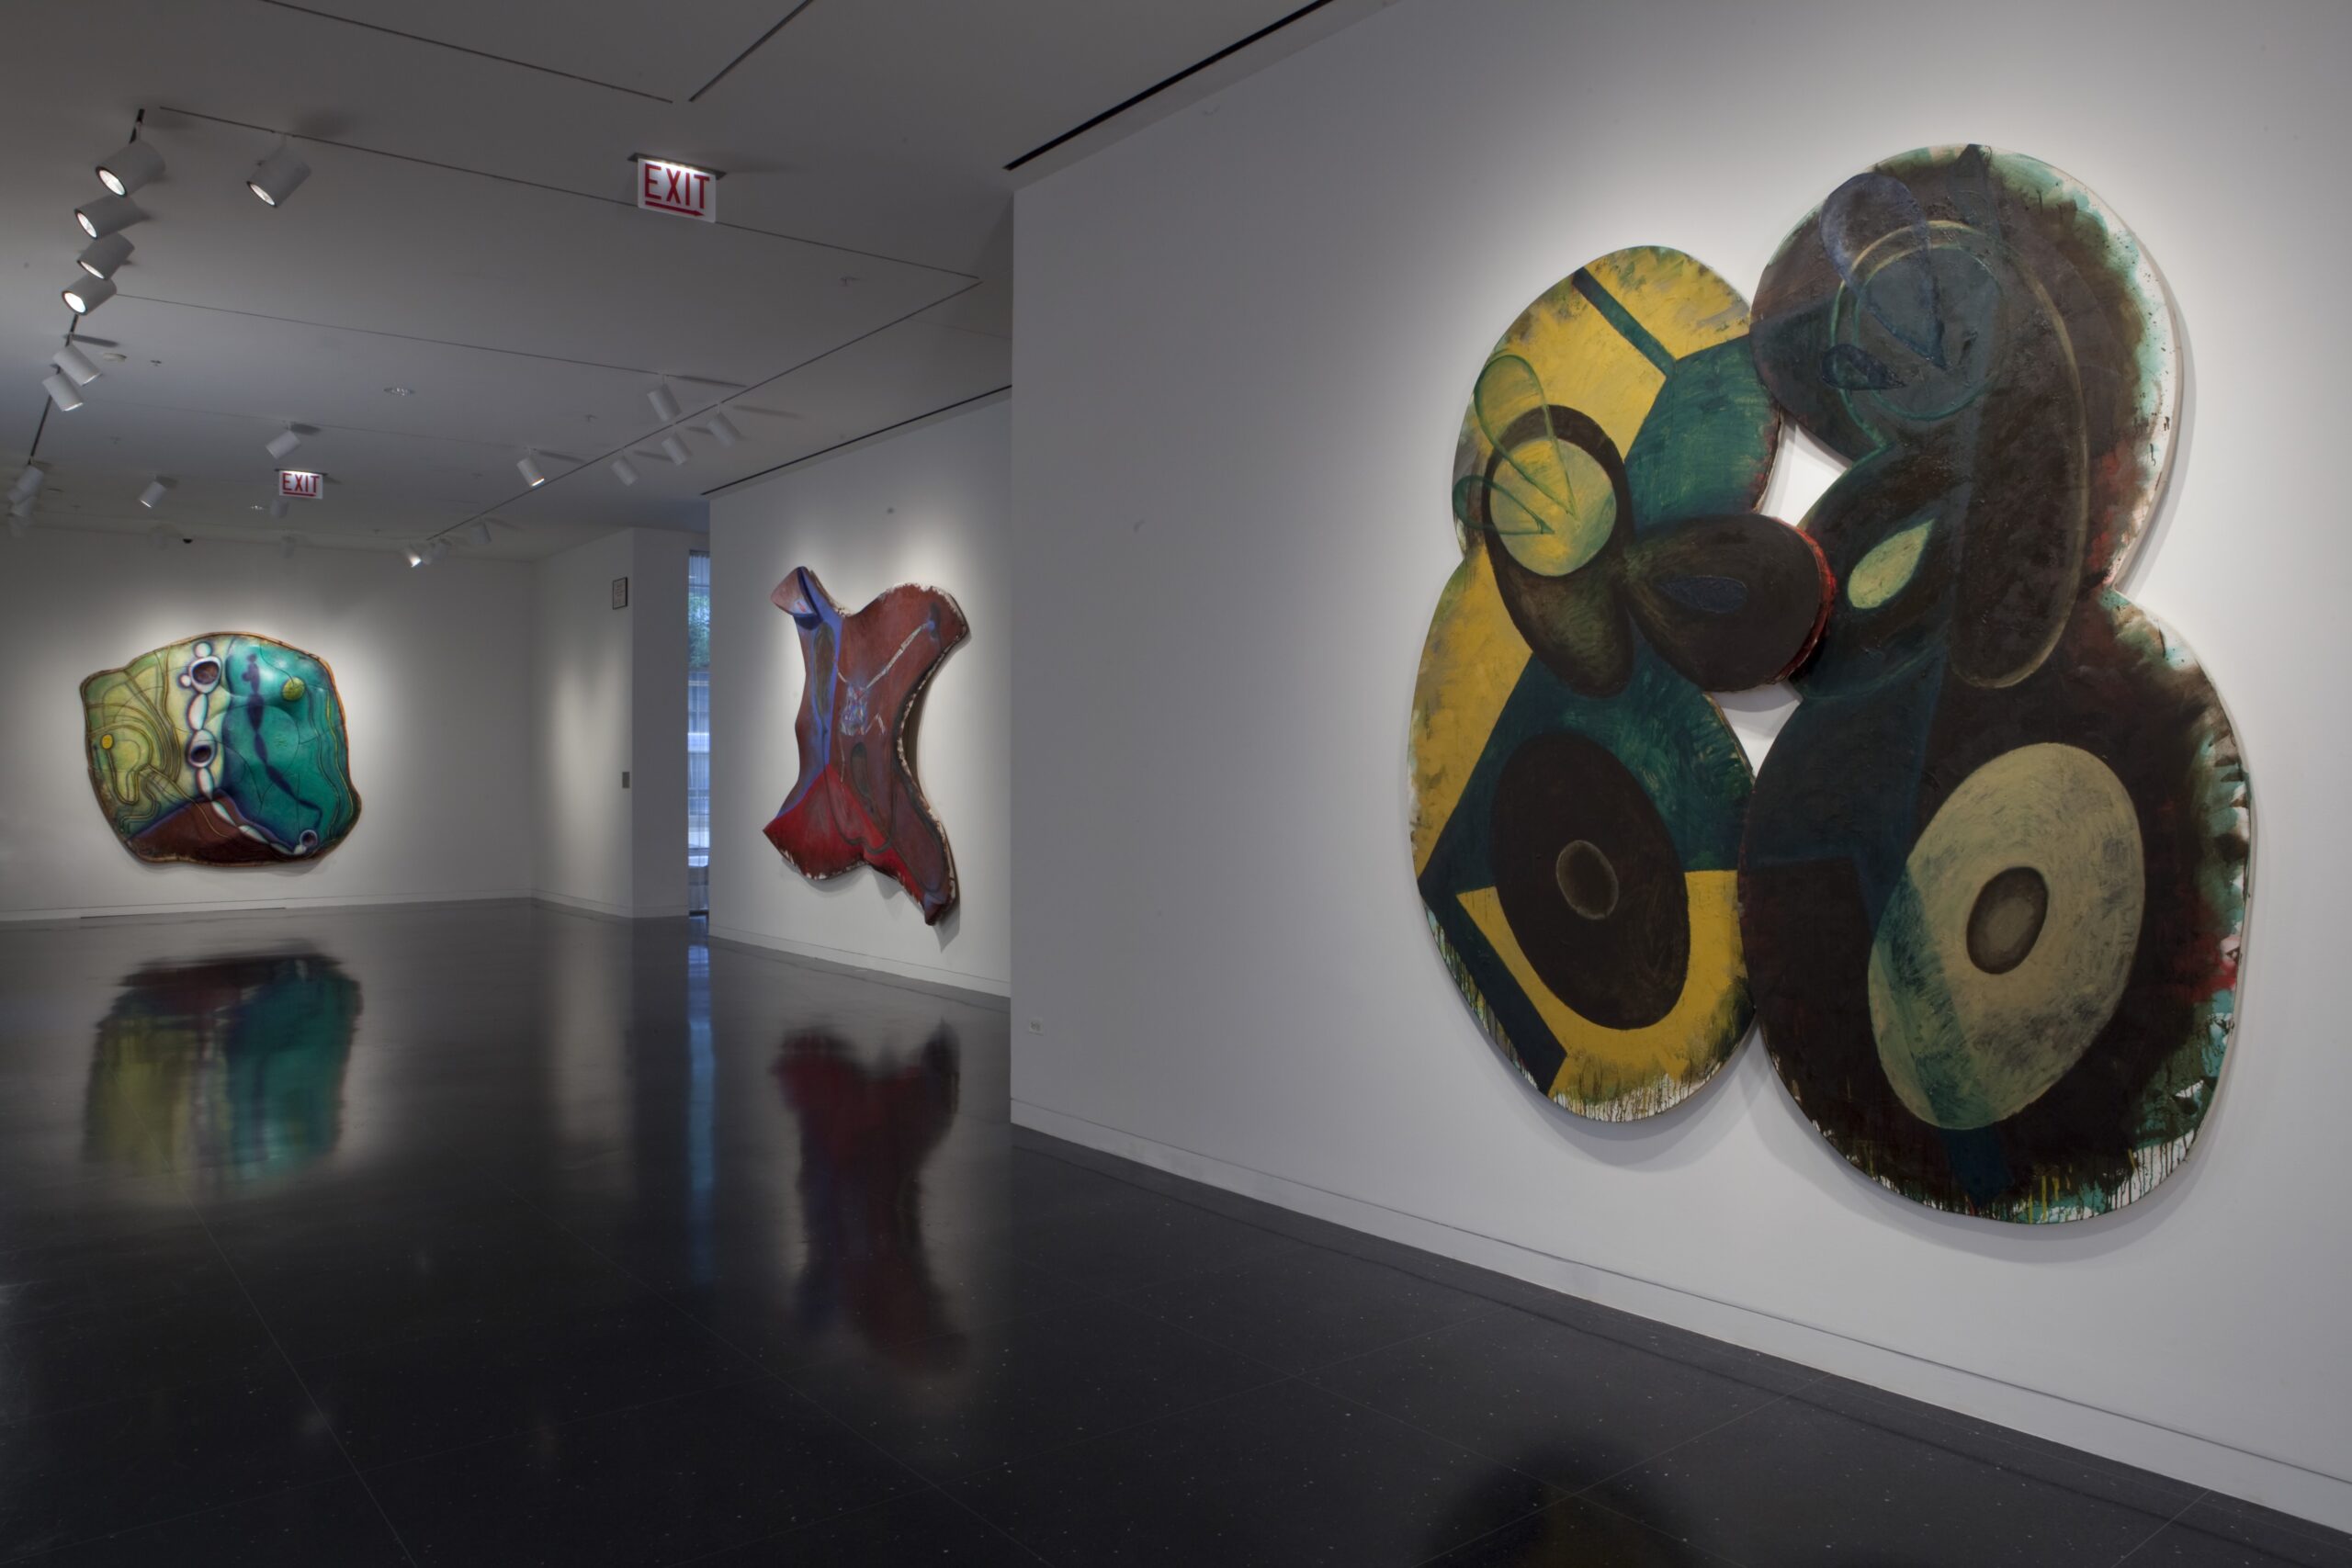 A white gallery space with three large, abstract artworks in colorful prints cut and carved into amorphous shapes.